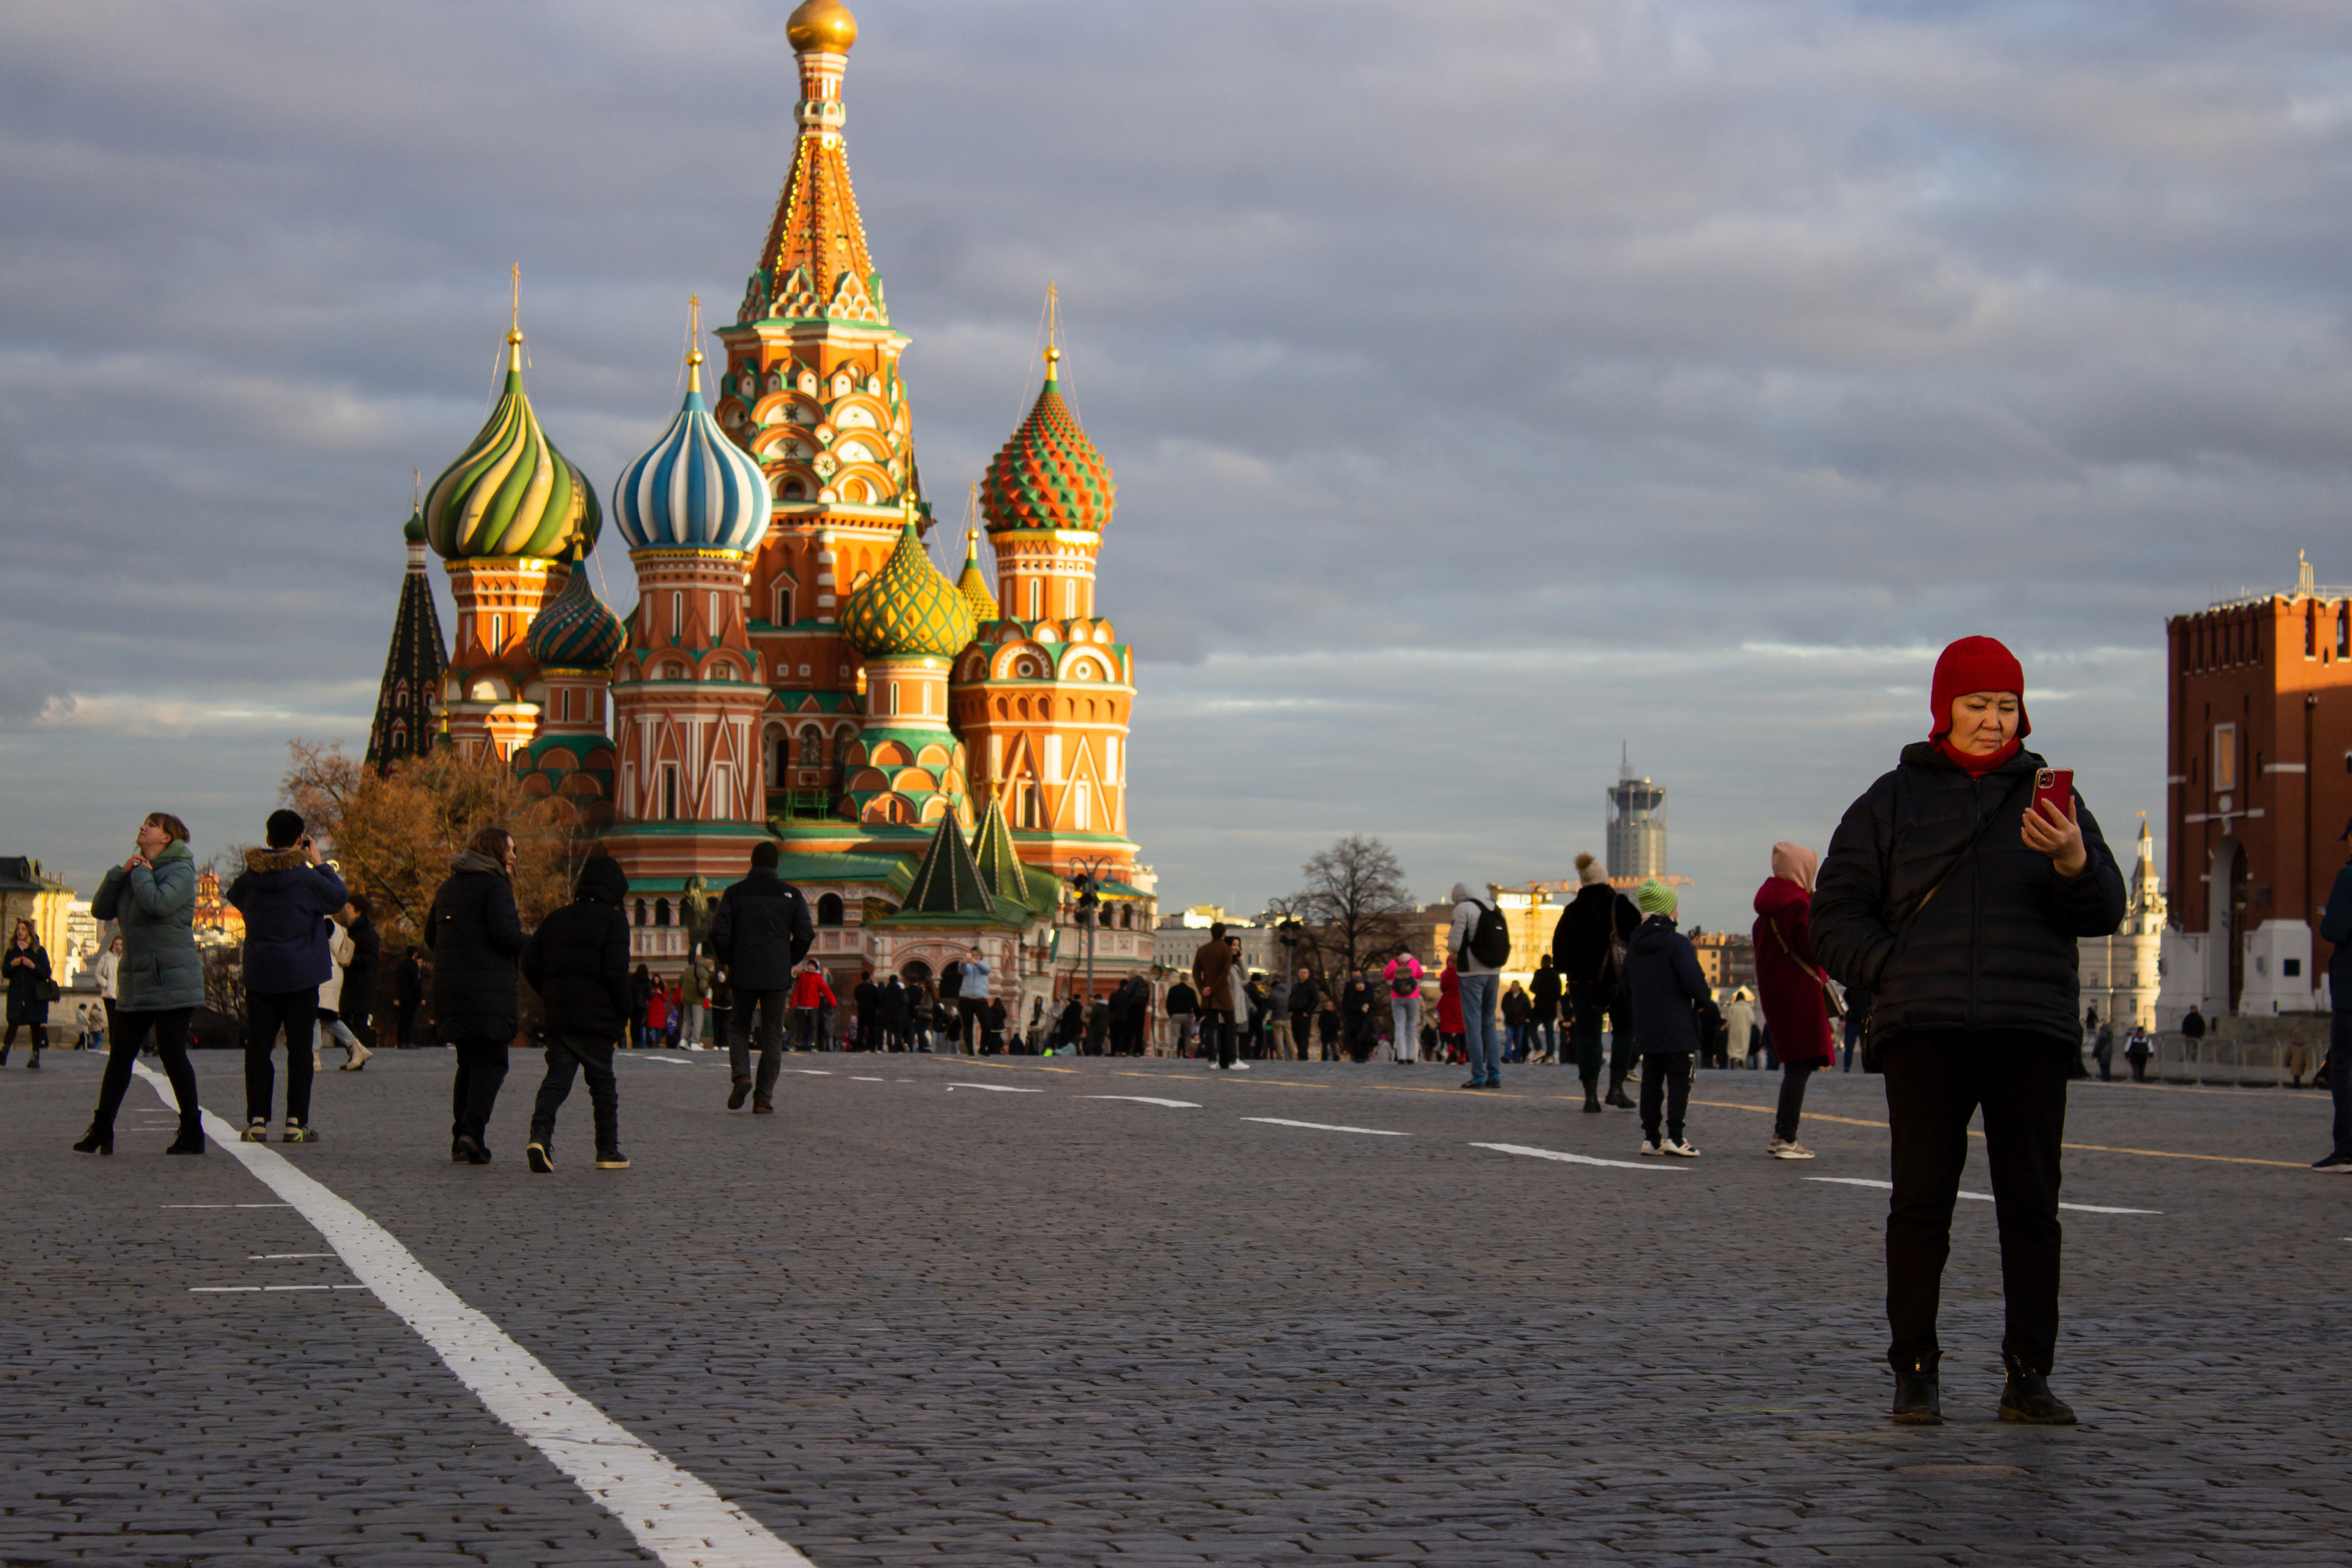 March 22, 2023, Moscow, Russia: People walk on the Red Square in Moscow, with Saint Basil's Cathedral in the background.